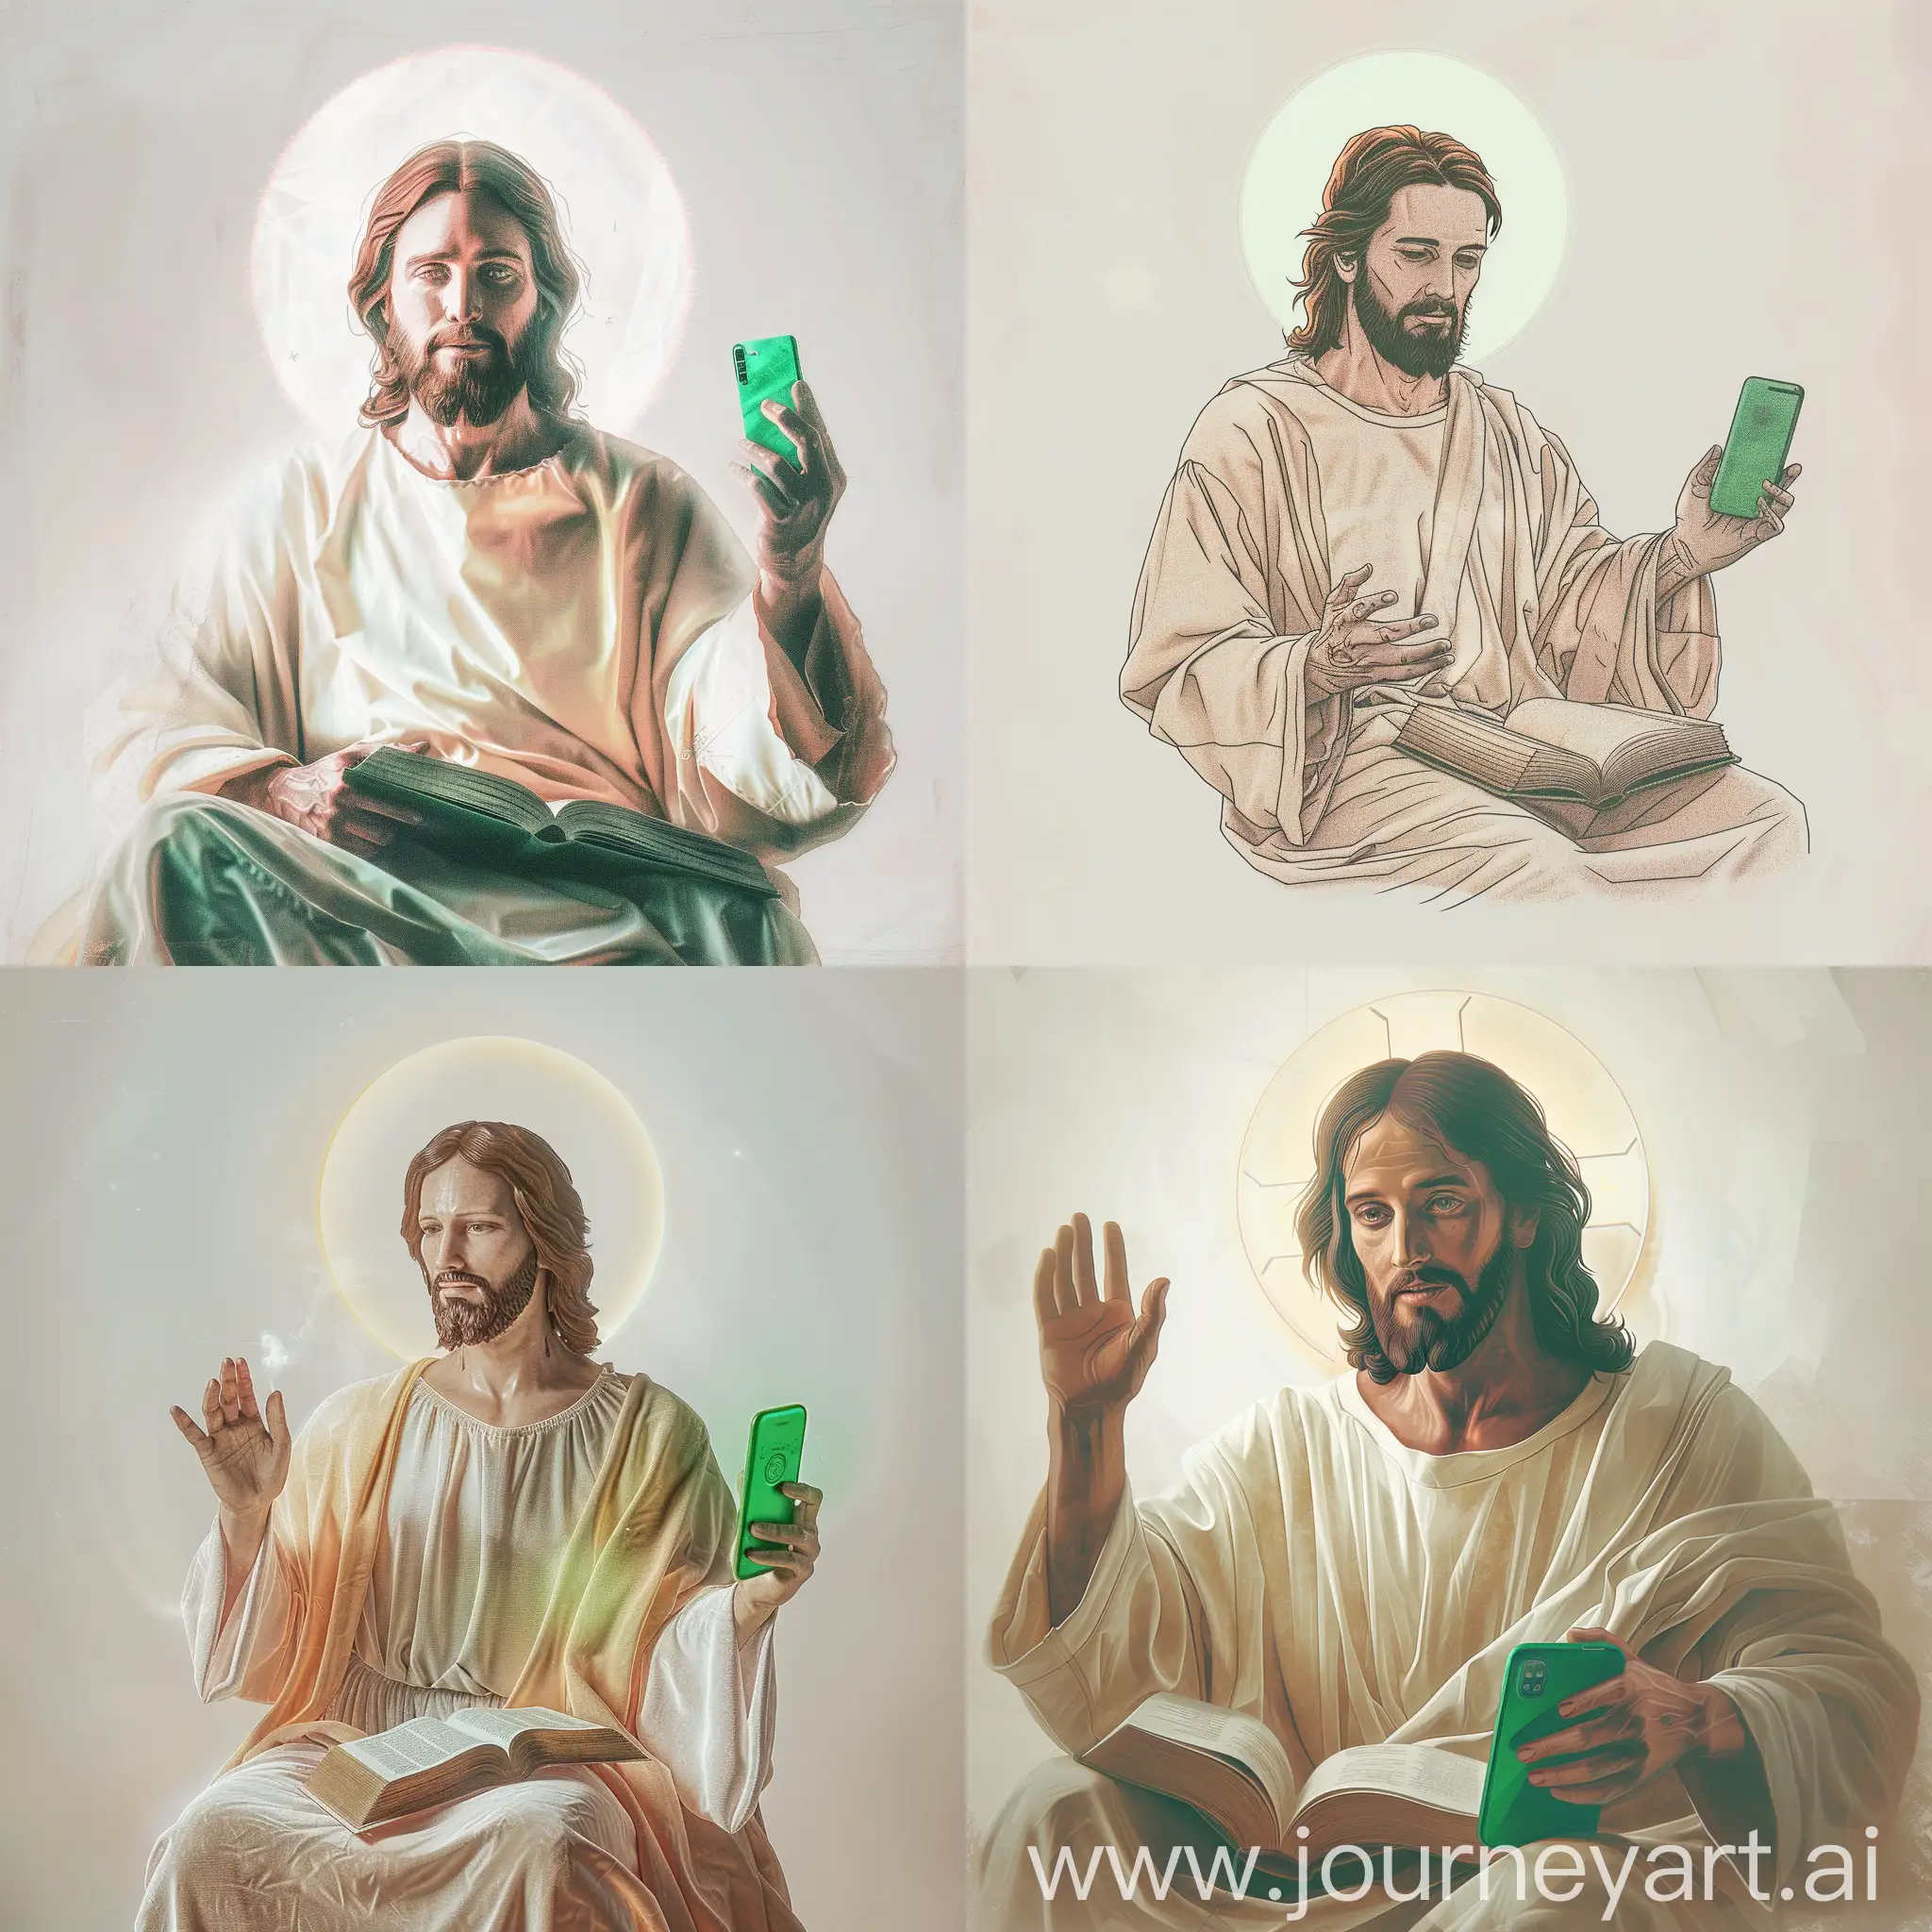 https://www.divino.ai/_next/static/media/f5QKz6MN3228572Wie8Transformed2Png.4d22ead1.png The overall color palette should consist of soft hues with white (#FFFFFF) background and no corners.

The figure of Jesus Christ, stylized yet identifiable, is placed on the center of the image. He is seated comfortably, dressed in a simple robe filled with calming tones.  His hands rest gently on the bible in his lap. Nobody else can be seen.

His face, larger than in the previous version, takes up a good portion of the center-right of the image. His eyes are clear and kind, looking directly towards the viewer, establishing a strong visual connection.

A soft, warm light illuminates his face, subtly forming a halo around his head. The light is more pronounced on his face, highlighting his peaceful and inviting expression.

Add a detail of one hand raised slightly, the palm open and facing the viewer, in a calming and welcoming gesture while holding a green smartphone.

The image should be void of unnecessary details to keep the focus on the figure of Jesus Christ, portraying him as a therapist in a modern, stylized, yet relatable manner. 